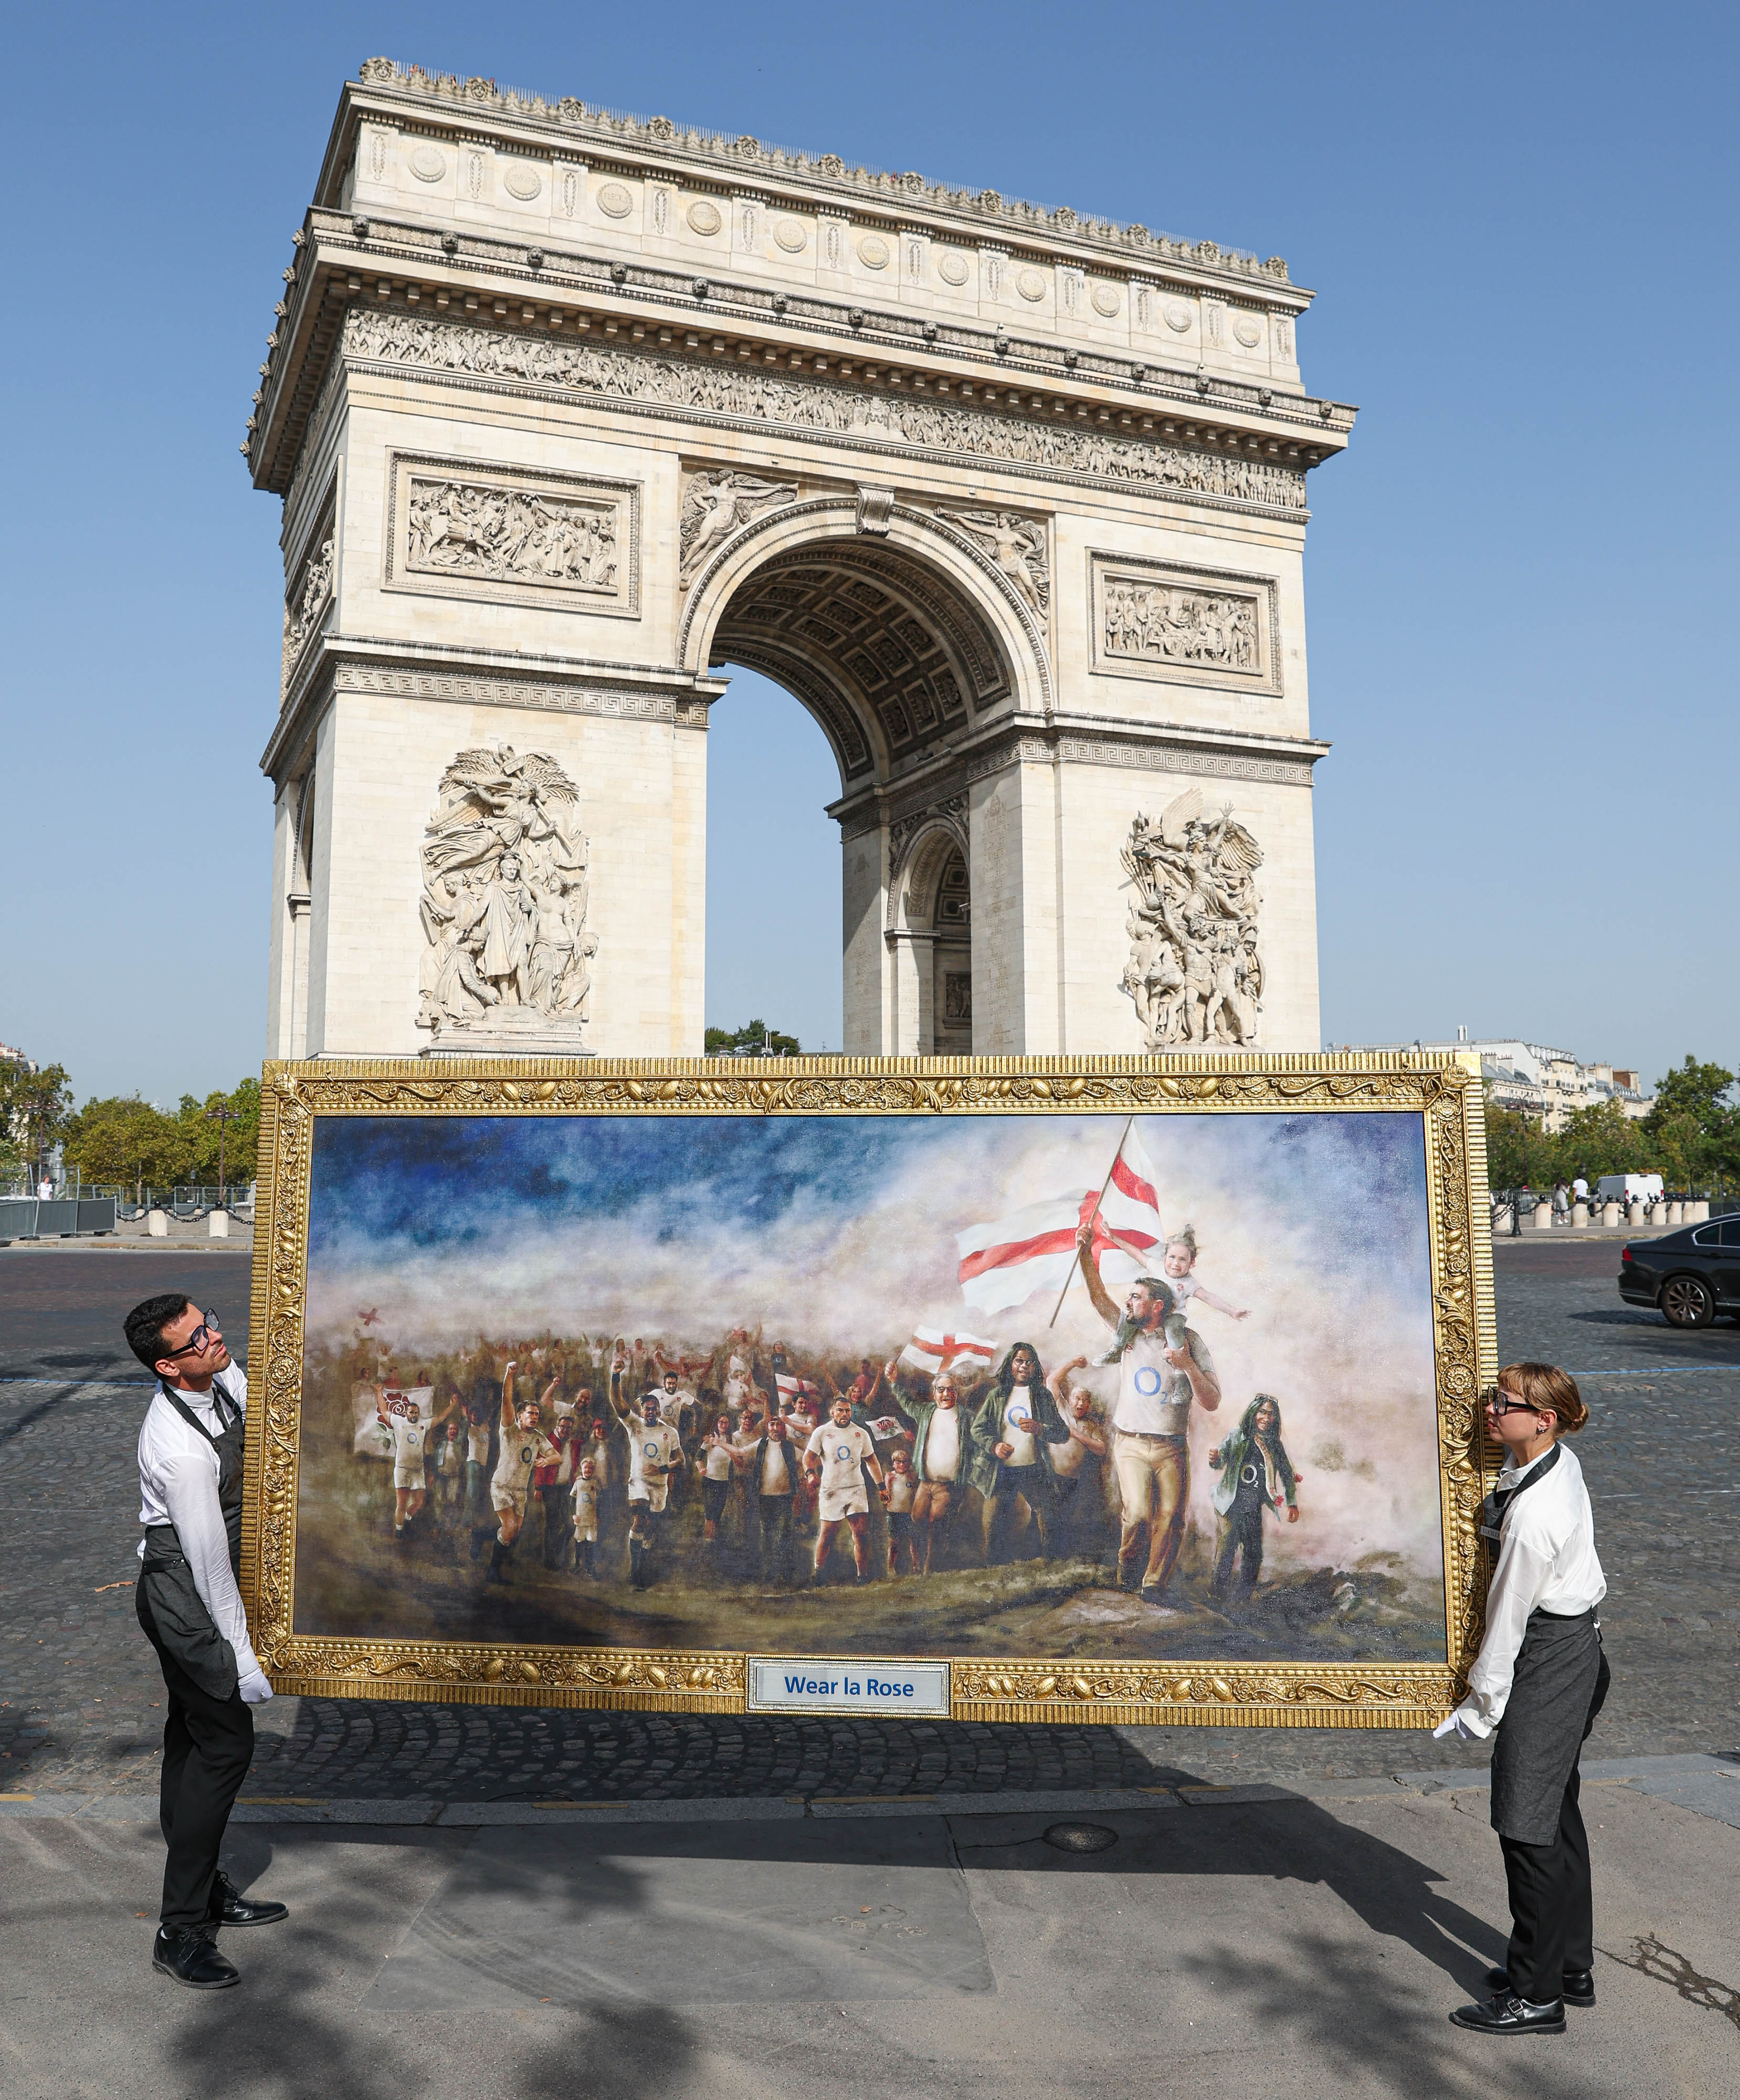 The artwork displayed in front of the Arc de Triomphe in Paris, France